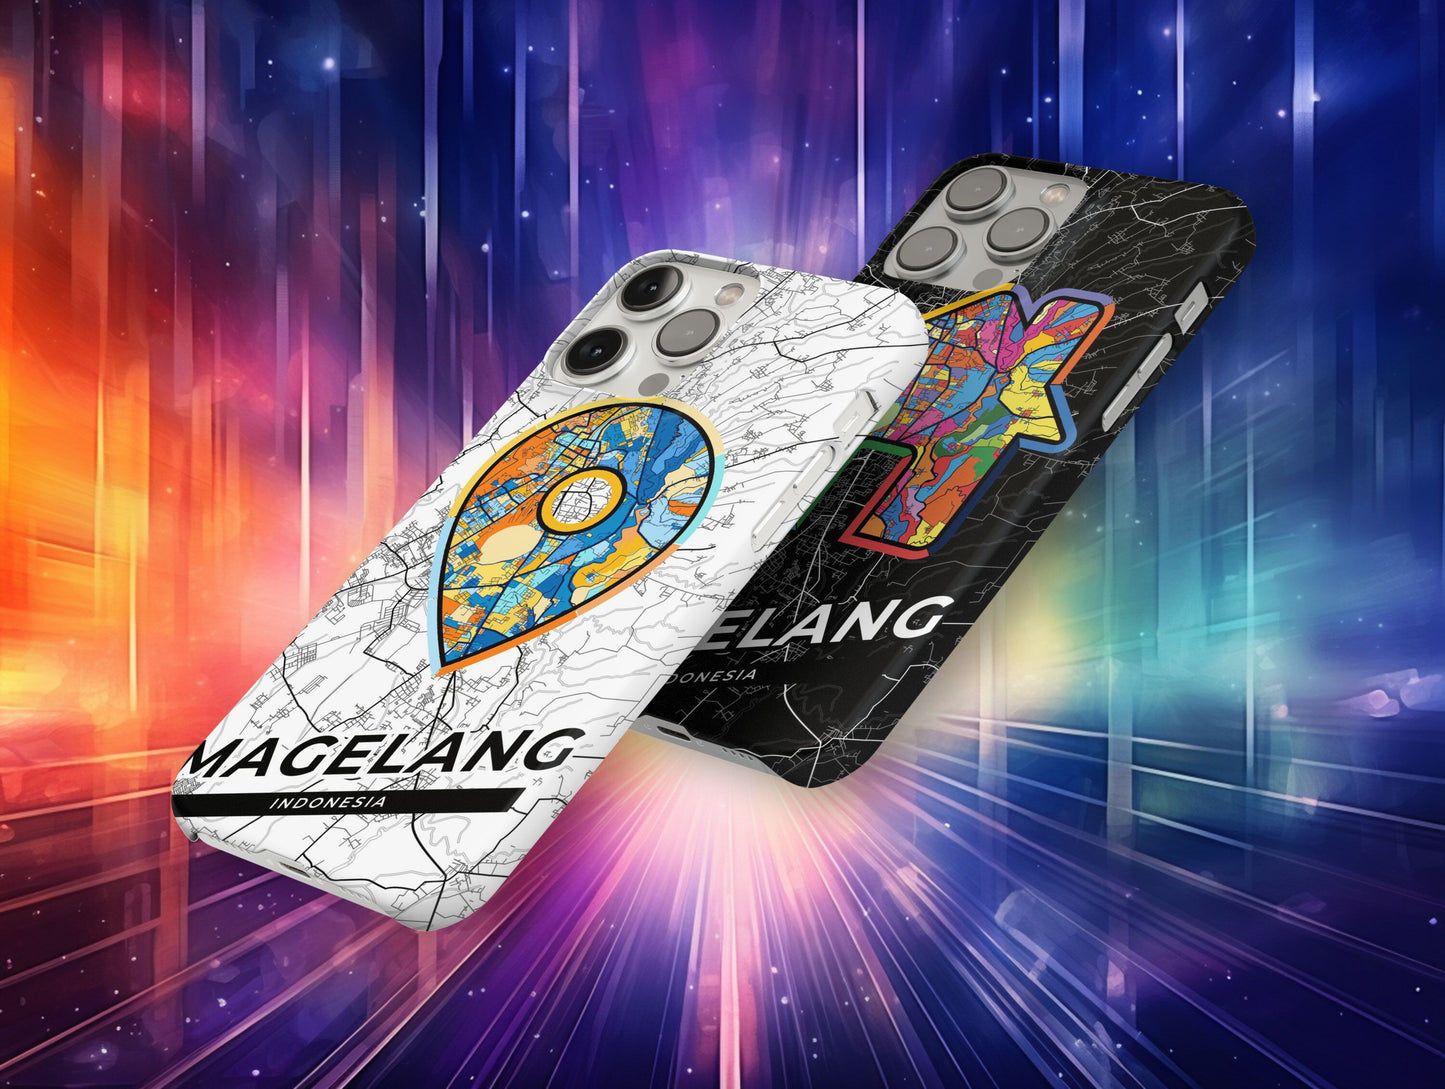 Magelang Indonesia slim phone case with colorful icon. Birthday, wedding or housewarming gift. Couple match cases.